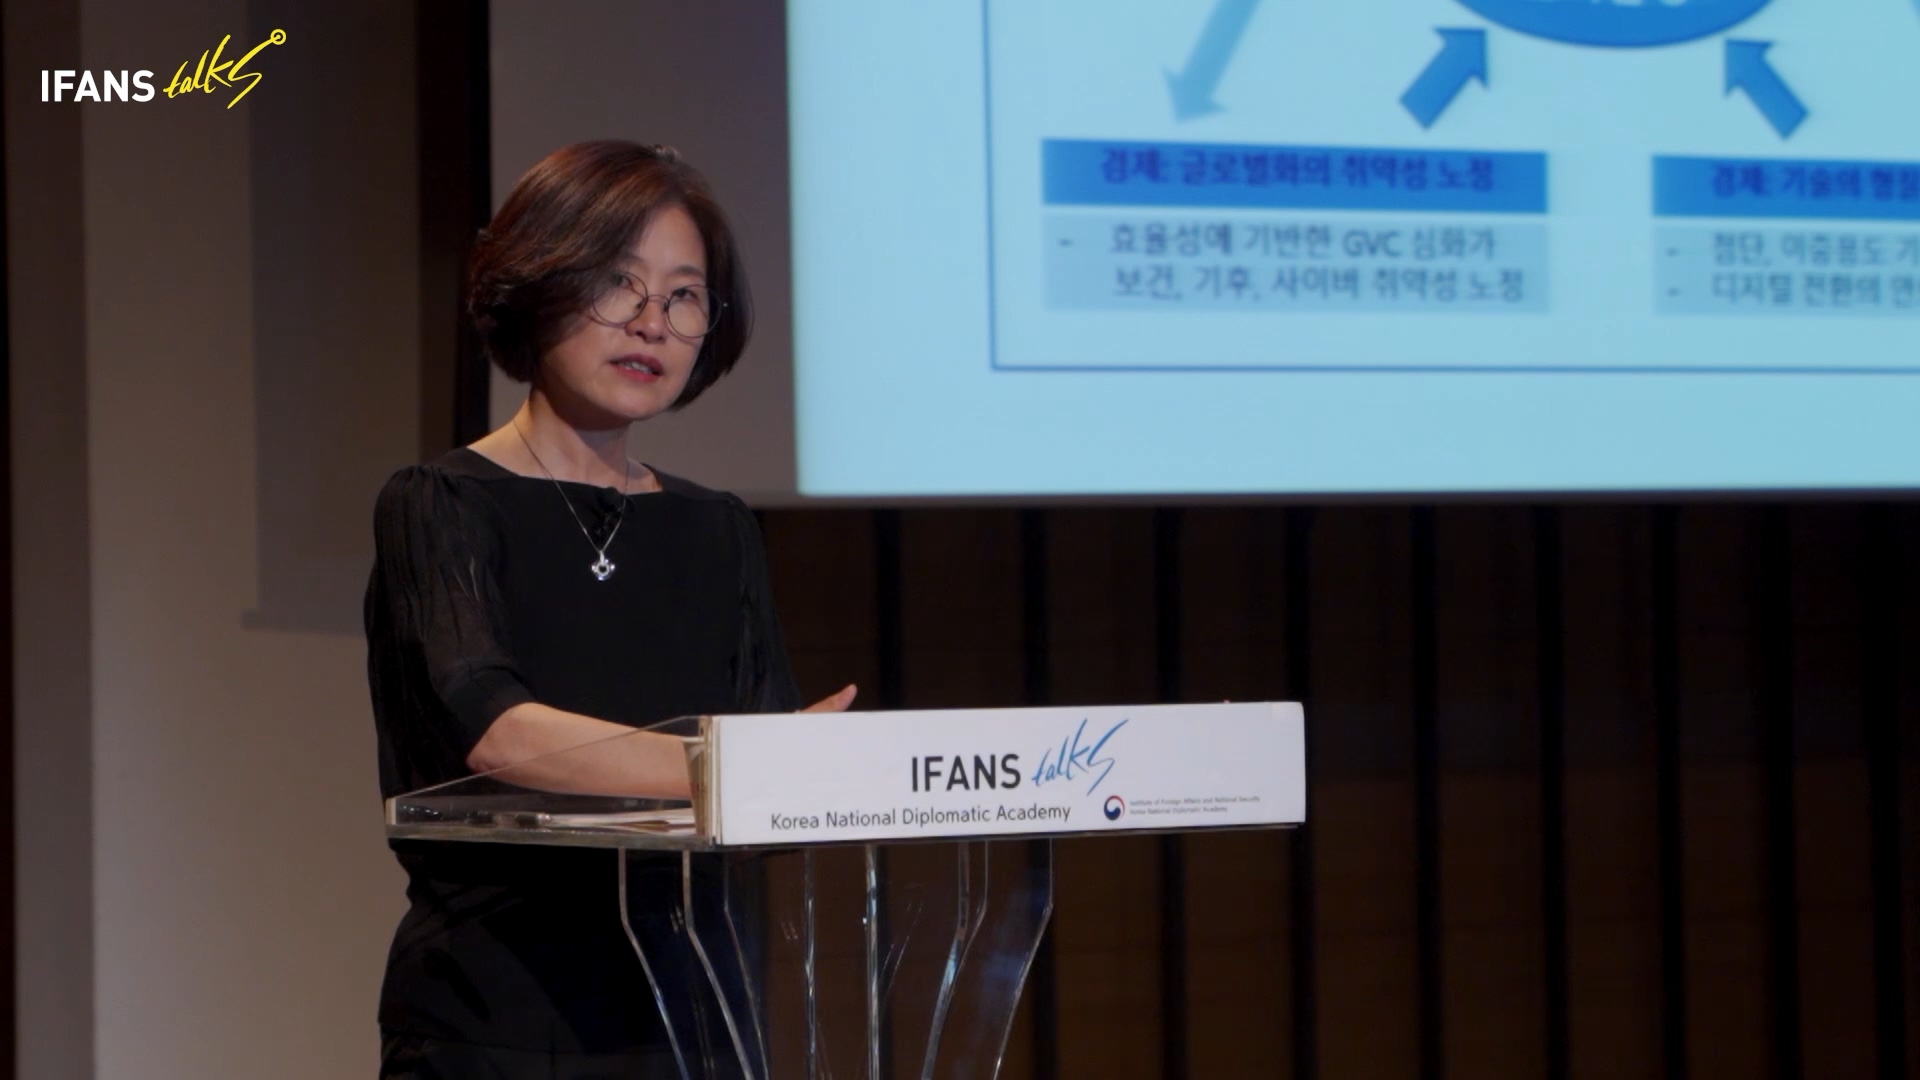 [The 27th IFANS Talks] IPEF in the Era of Economic Security, Director-General KIM Yanghee of the Department of International Economy, Trade and Development Studies